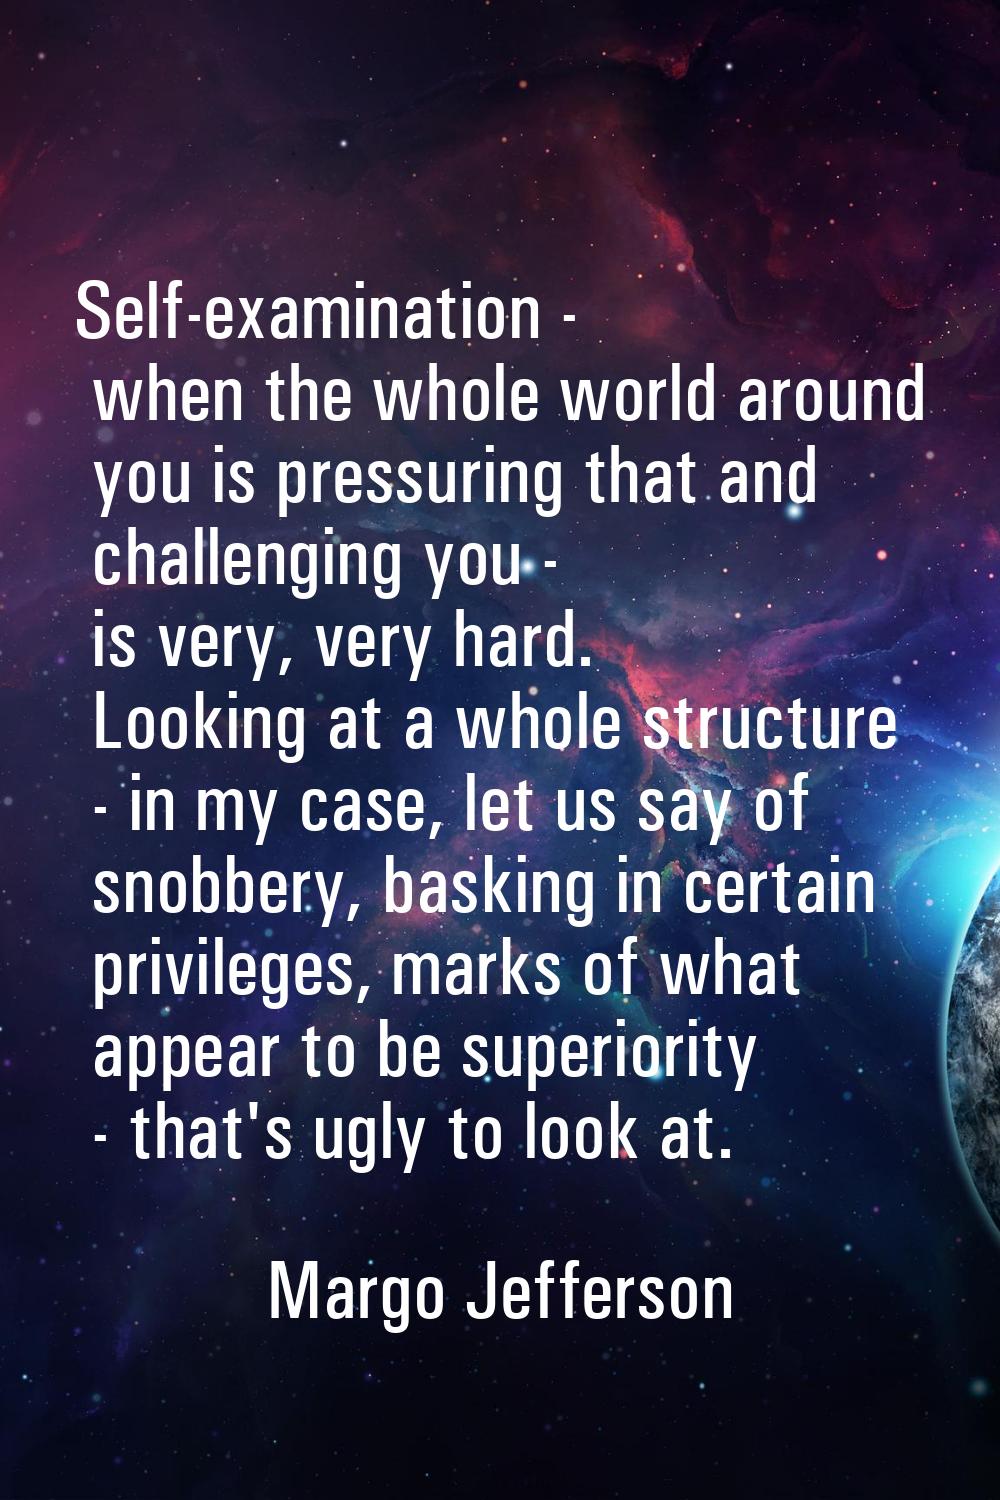 Self-examination - when the whole world around you is pressuring that and challenging you - is very